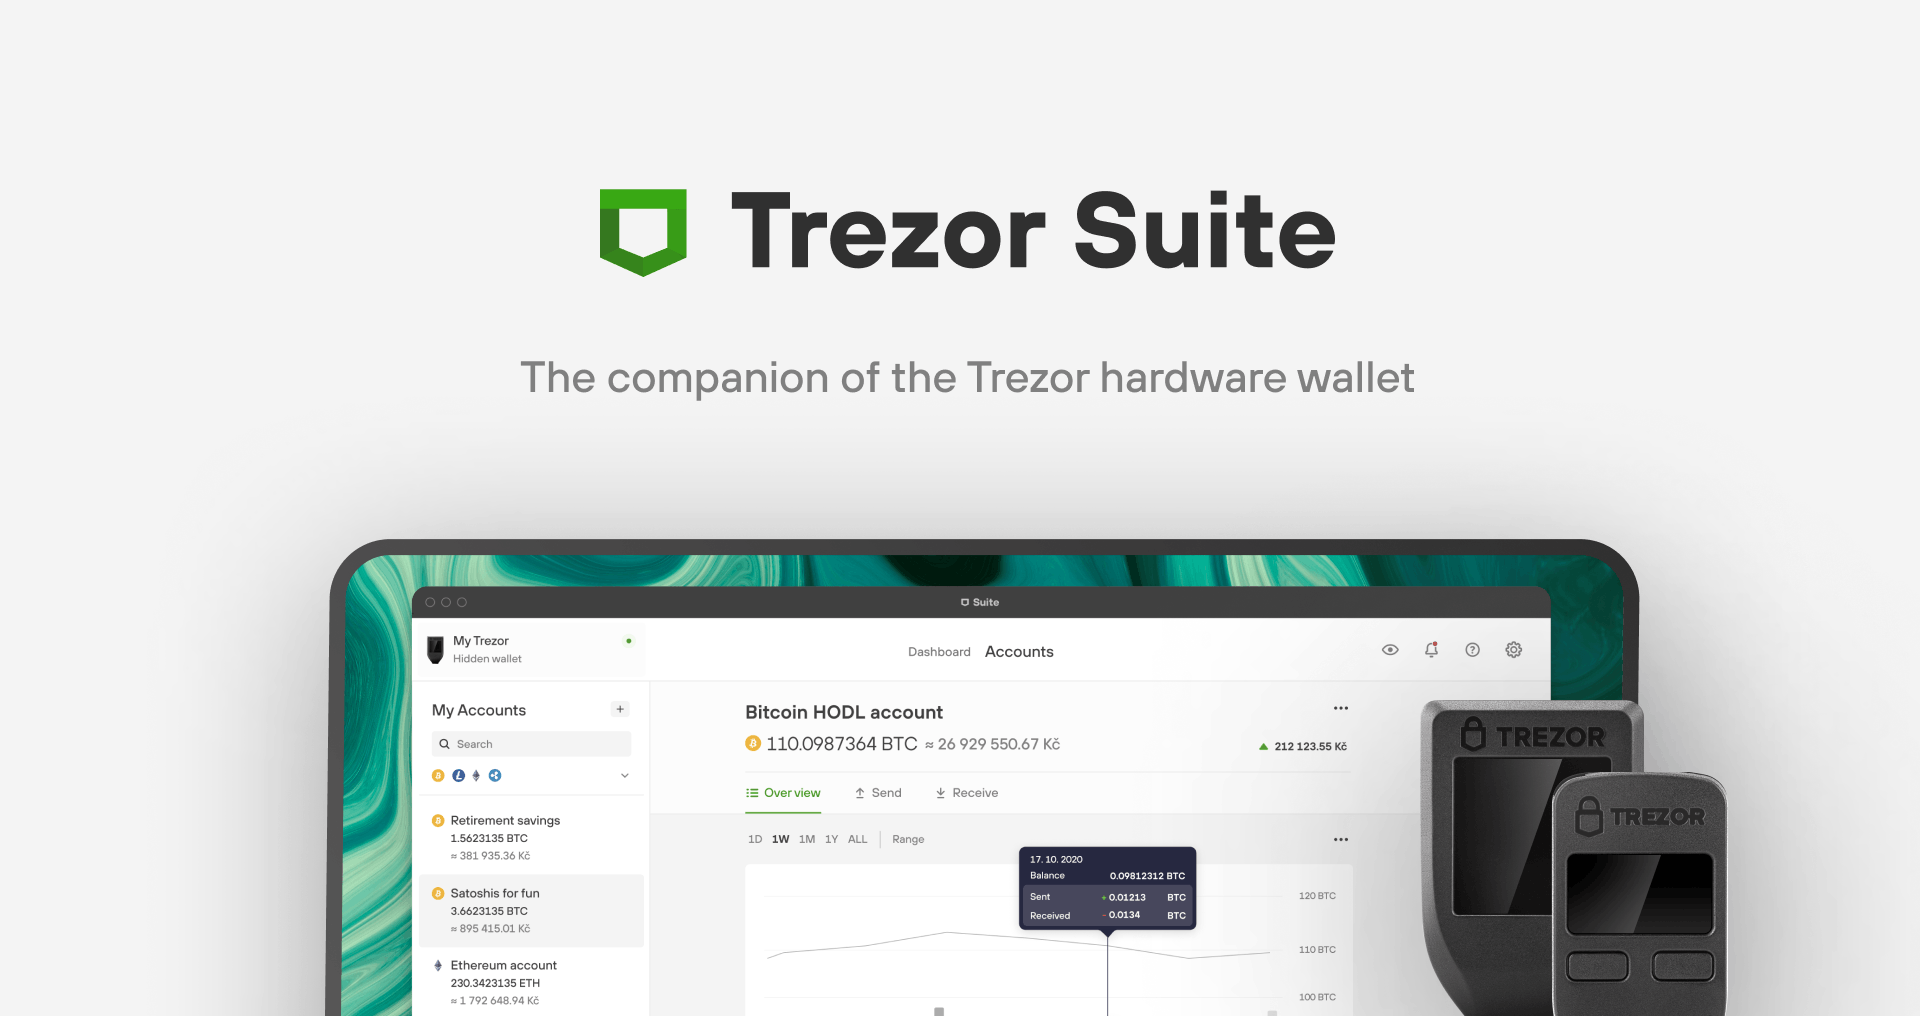 Trezor Suite. New desktop & browser app for Trezor hardware wallets. Trezor Suite brings big improvements across three key pillars of usability, security and privacy.